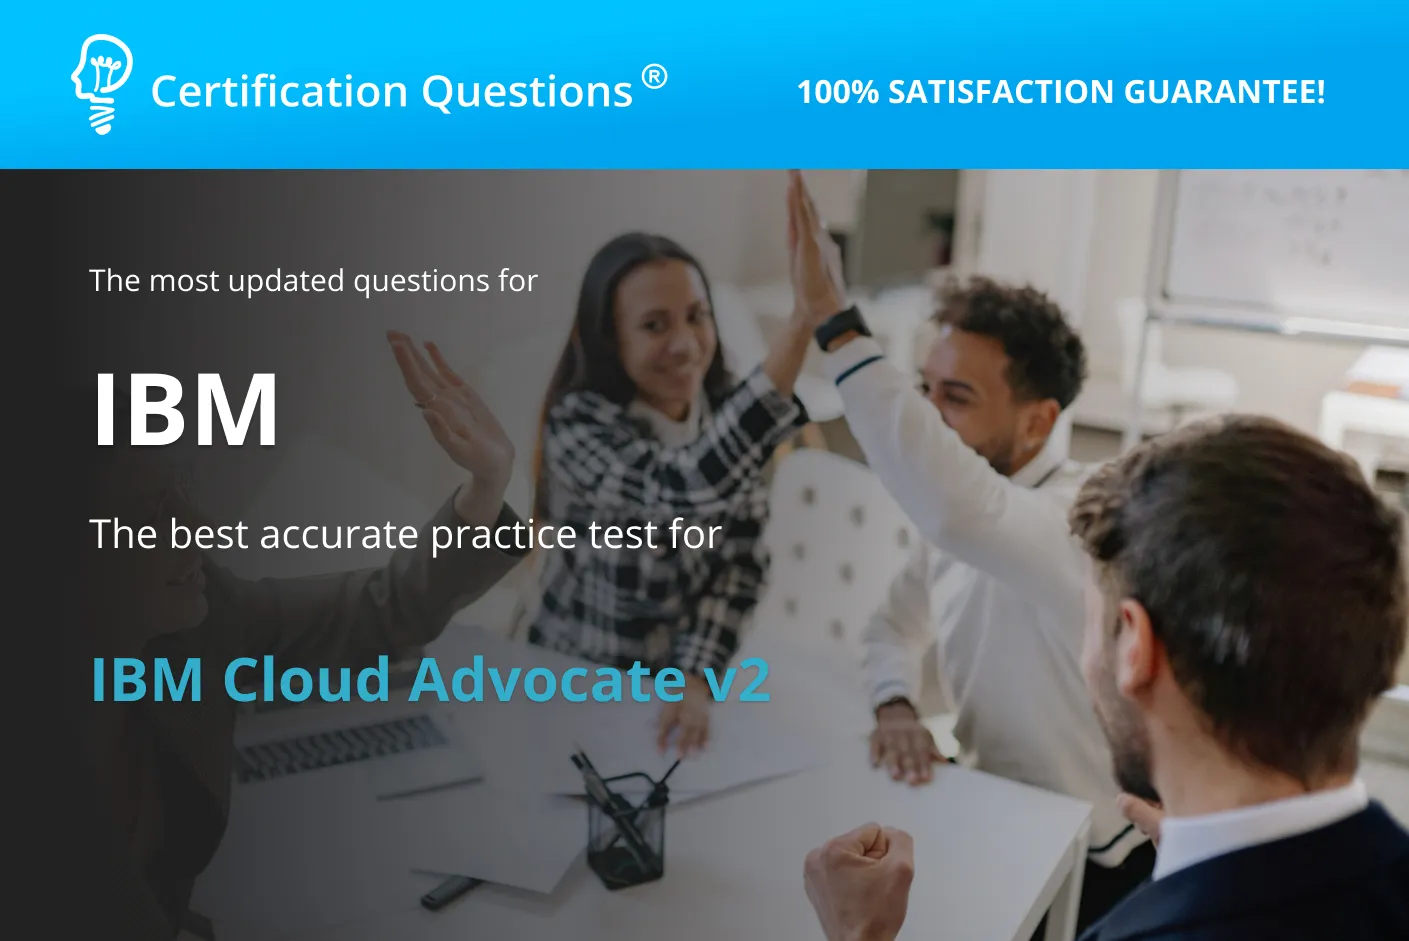 This image is related to IBM Cloud Advocate V2 practice test